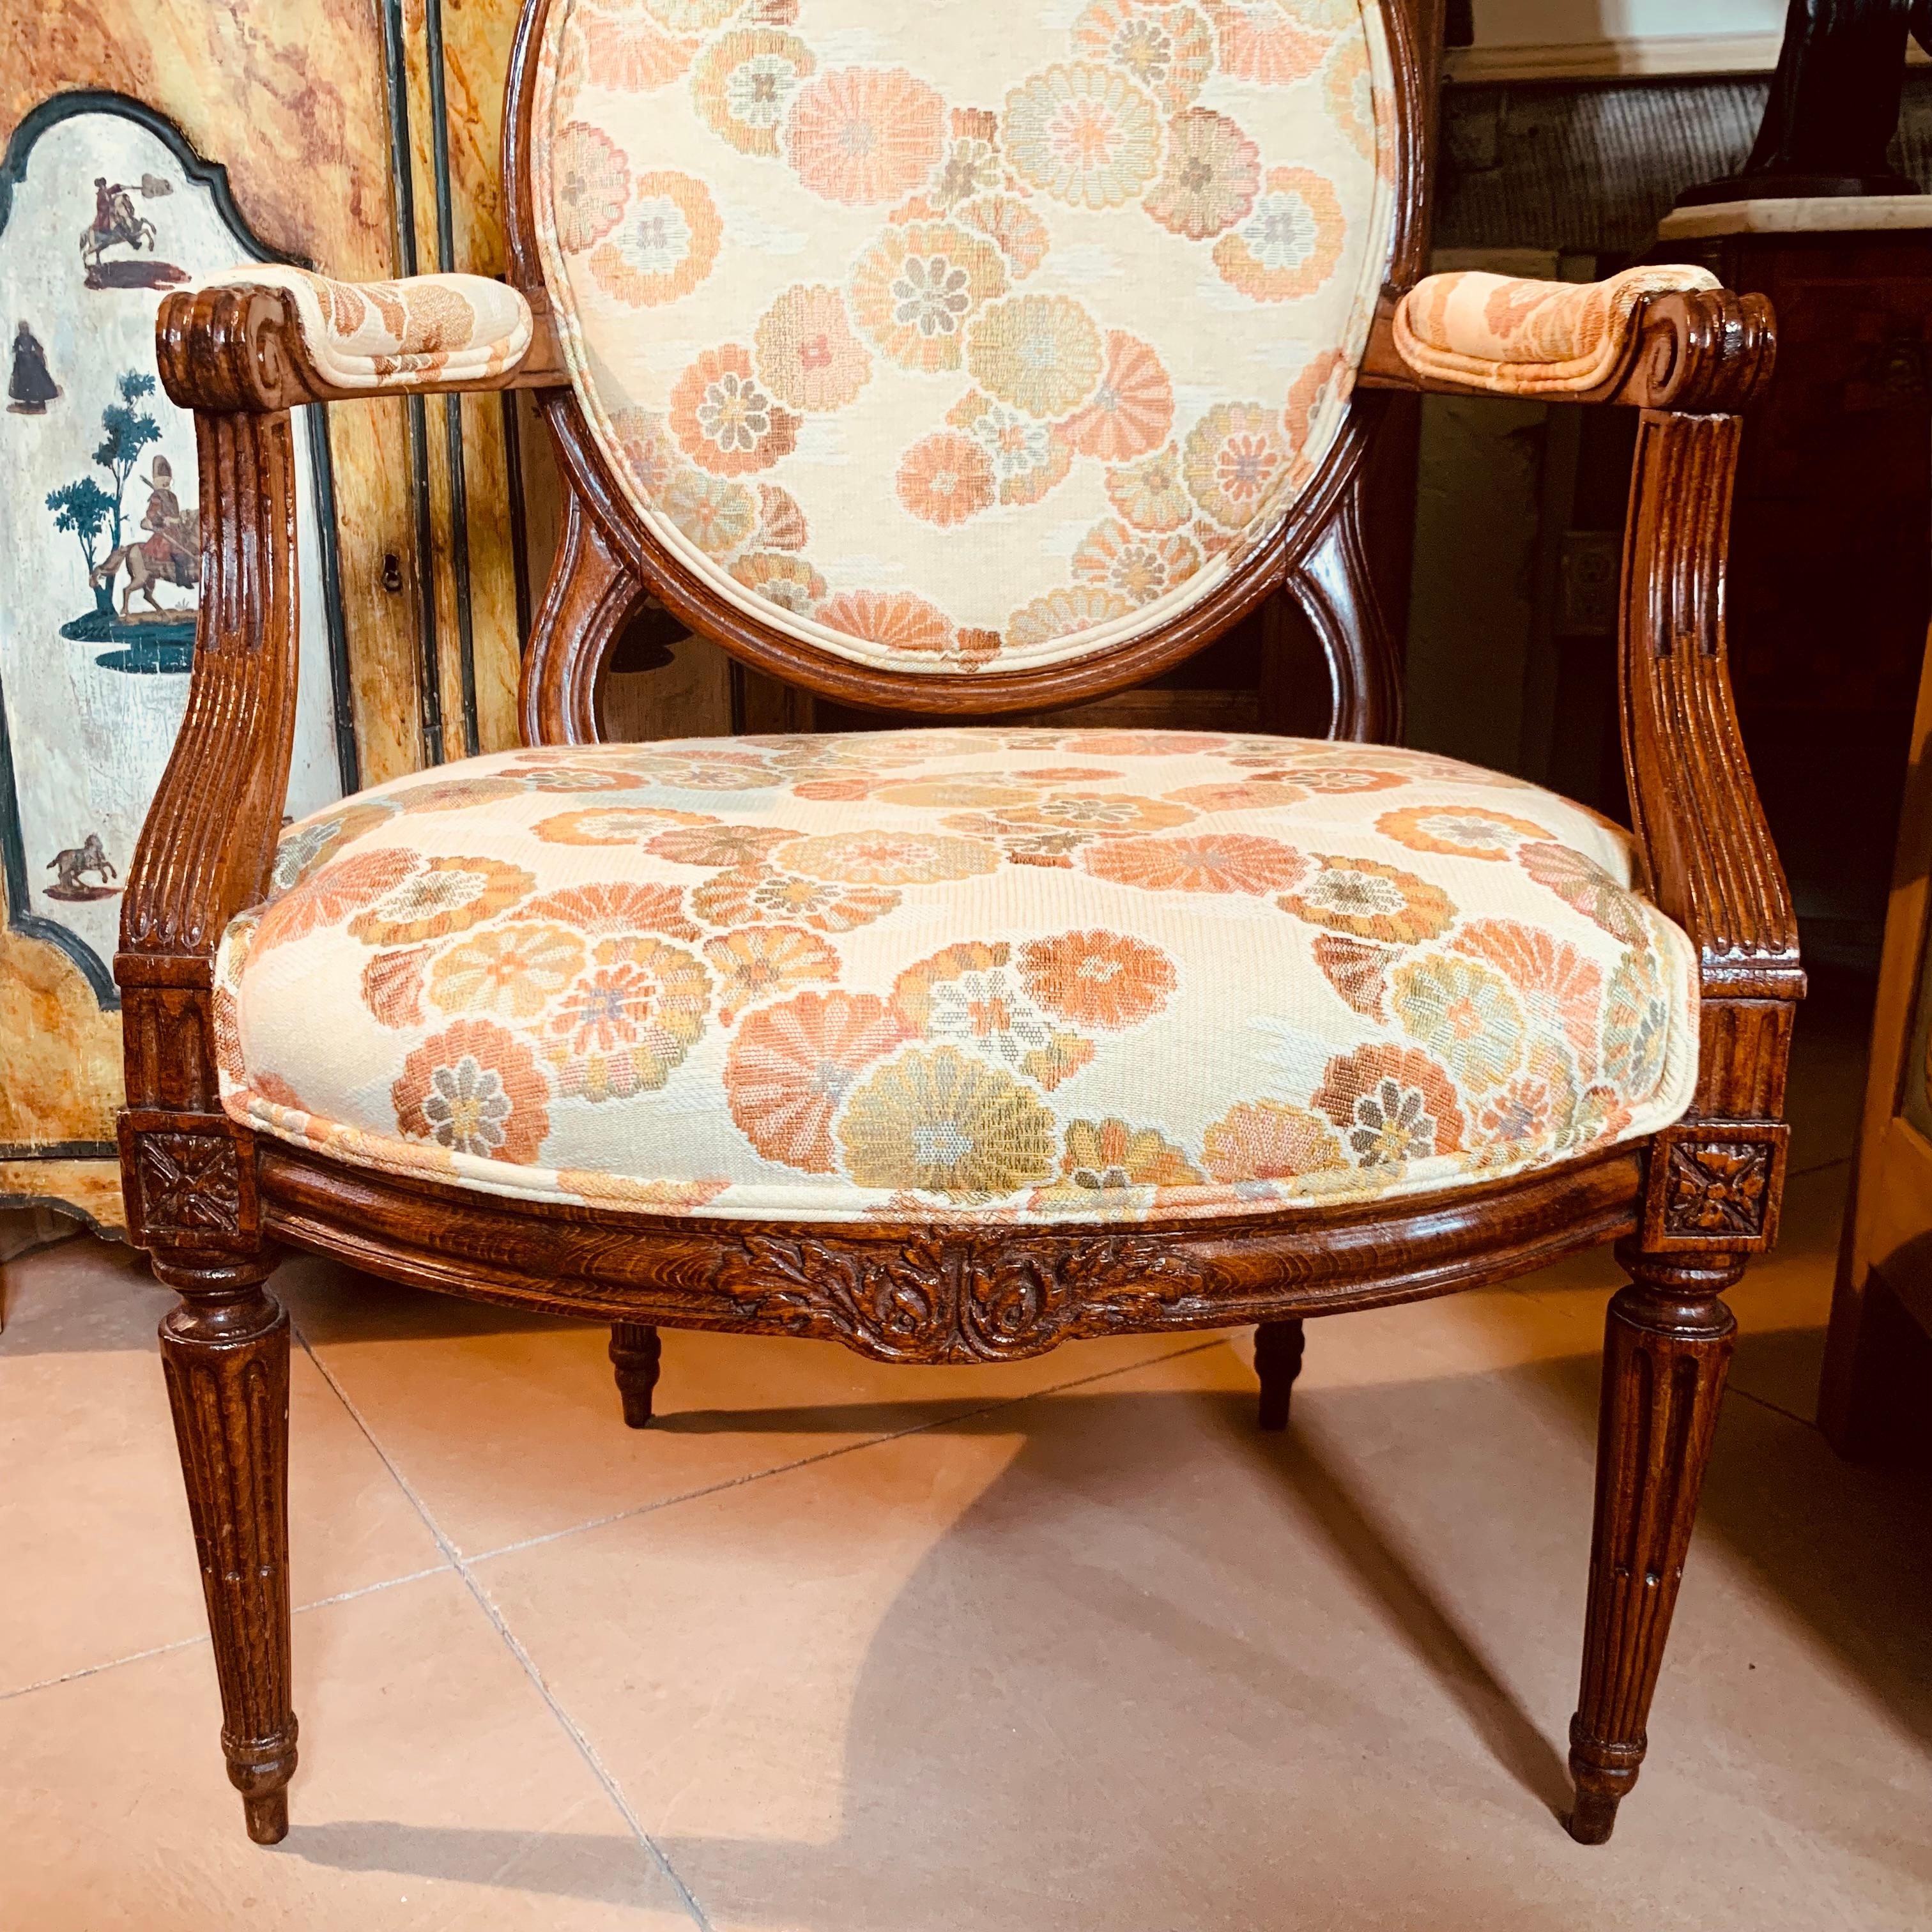 A set of four antique armchairs, handsomely carved with an acanthus flourish at the crests and at the centers of each front seat rail, the arms and turned tapered legs attractively carved with stop fluting. Seat bottoms reinforced with recent corner